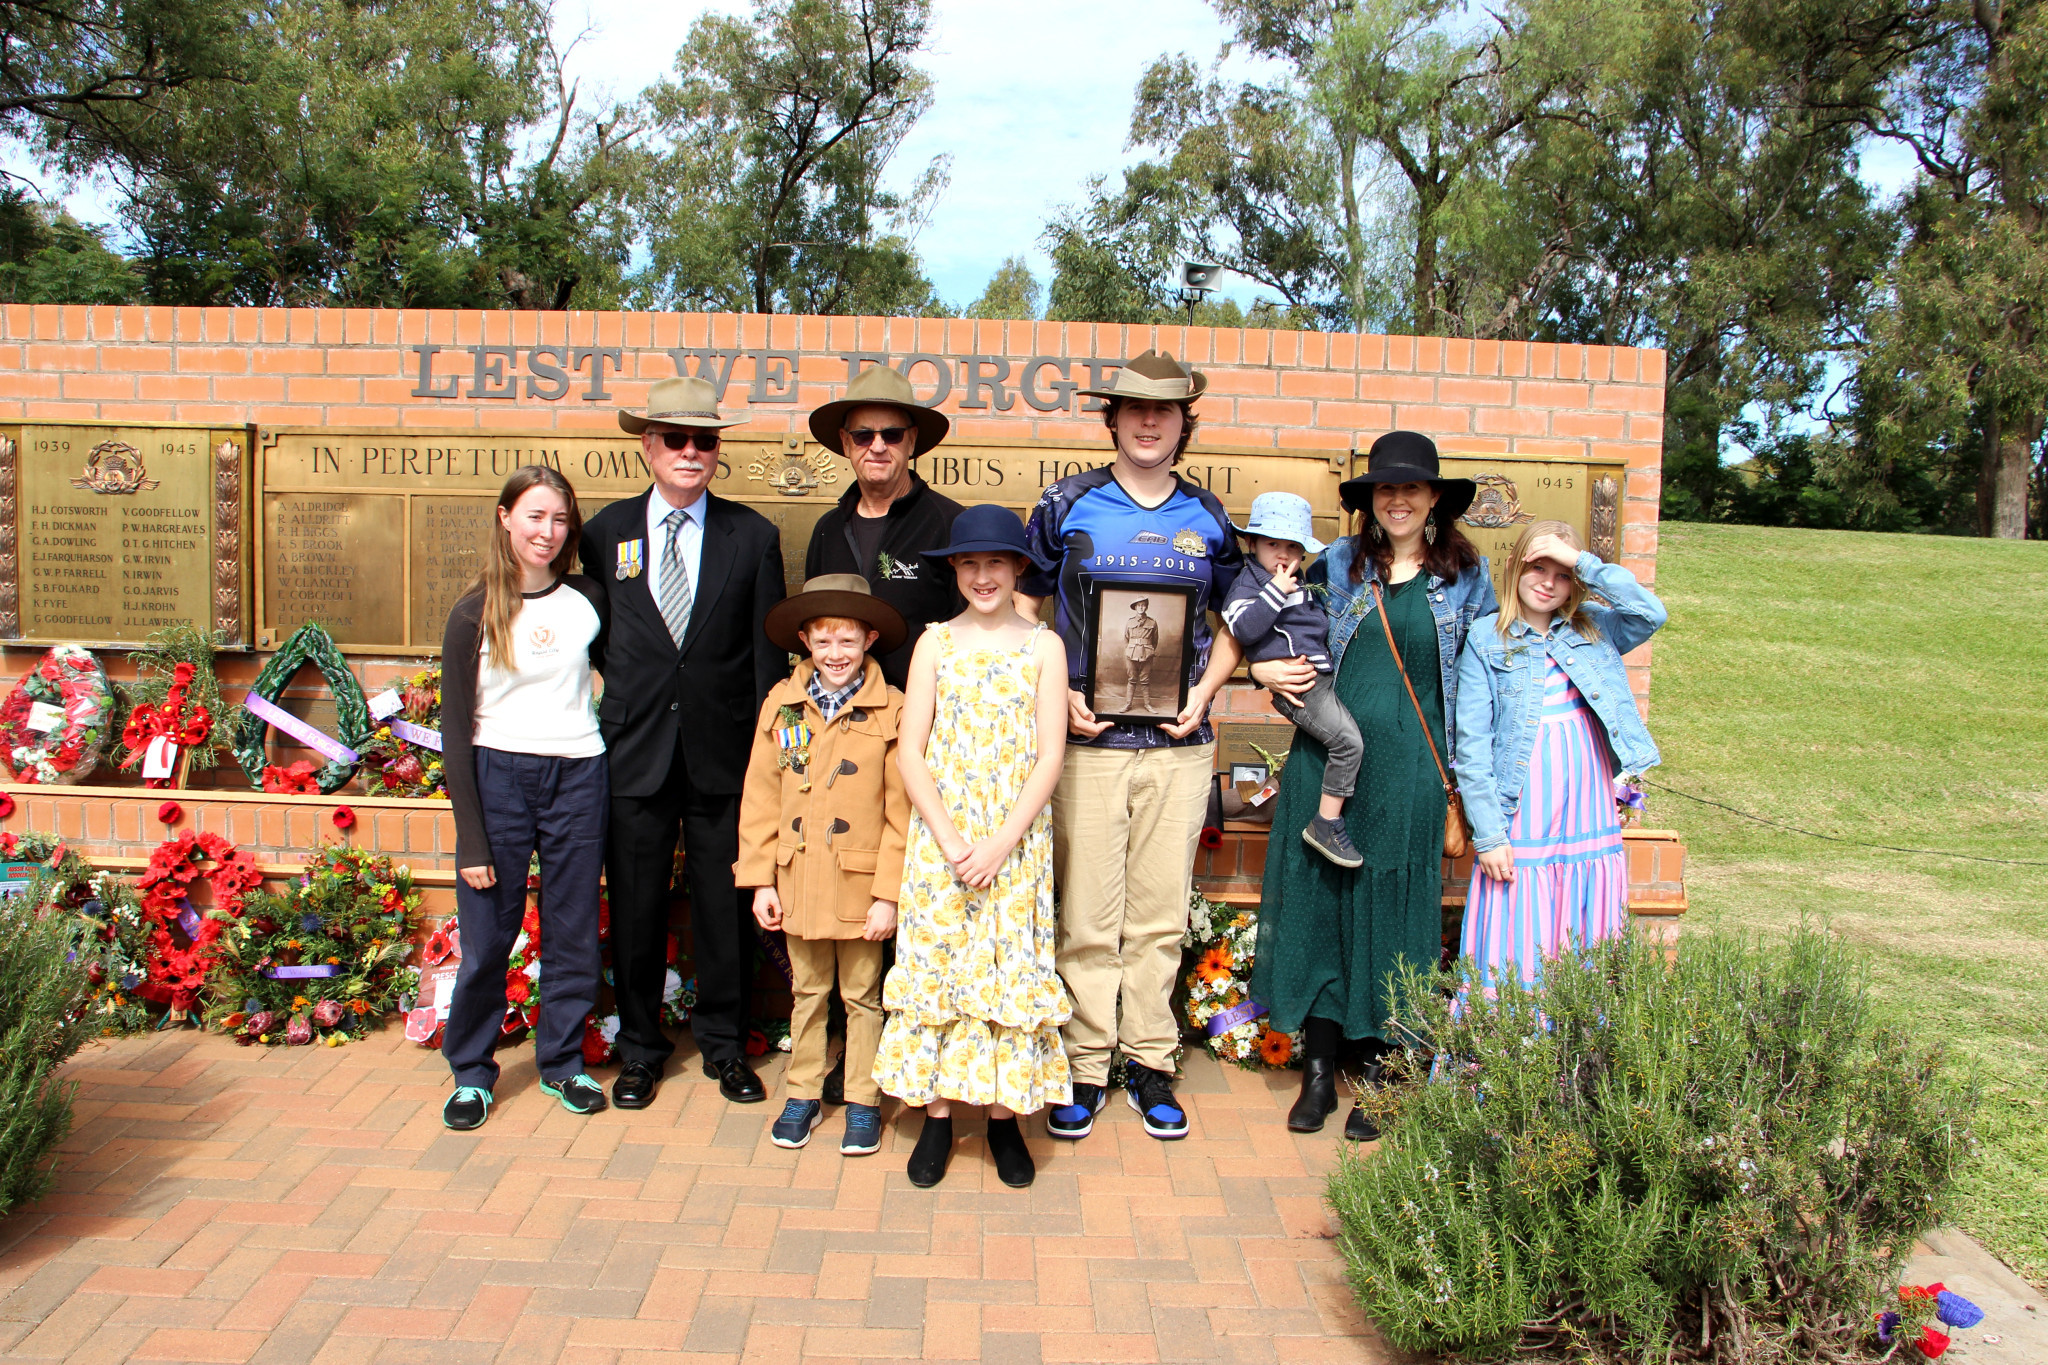 Descendants of Frederick John Stubbs, and of Charles and Arthur Hobbs (who are remembered on the Gilgandra War Memorial), placed wreaths and photos at this year’s ANZAC Day commemorations to honour their sacrifice. Photo by The Gilgandra Weekly: Lucie Peart.